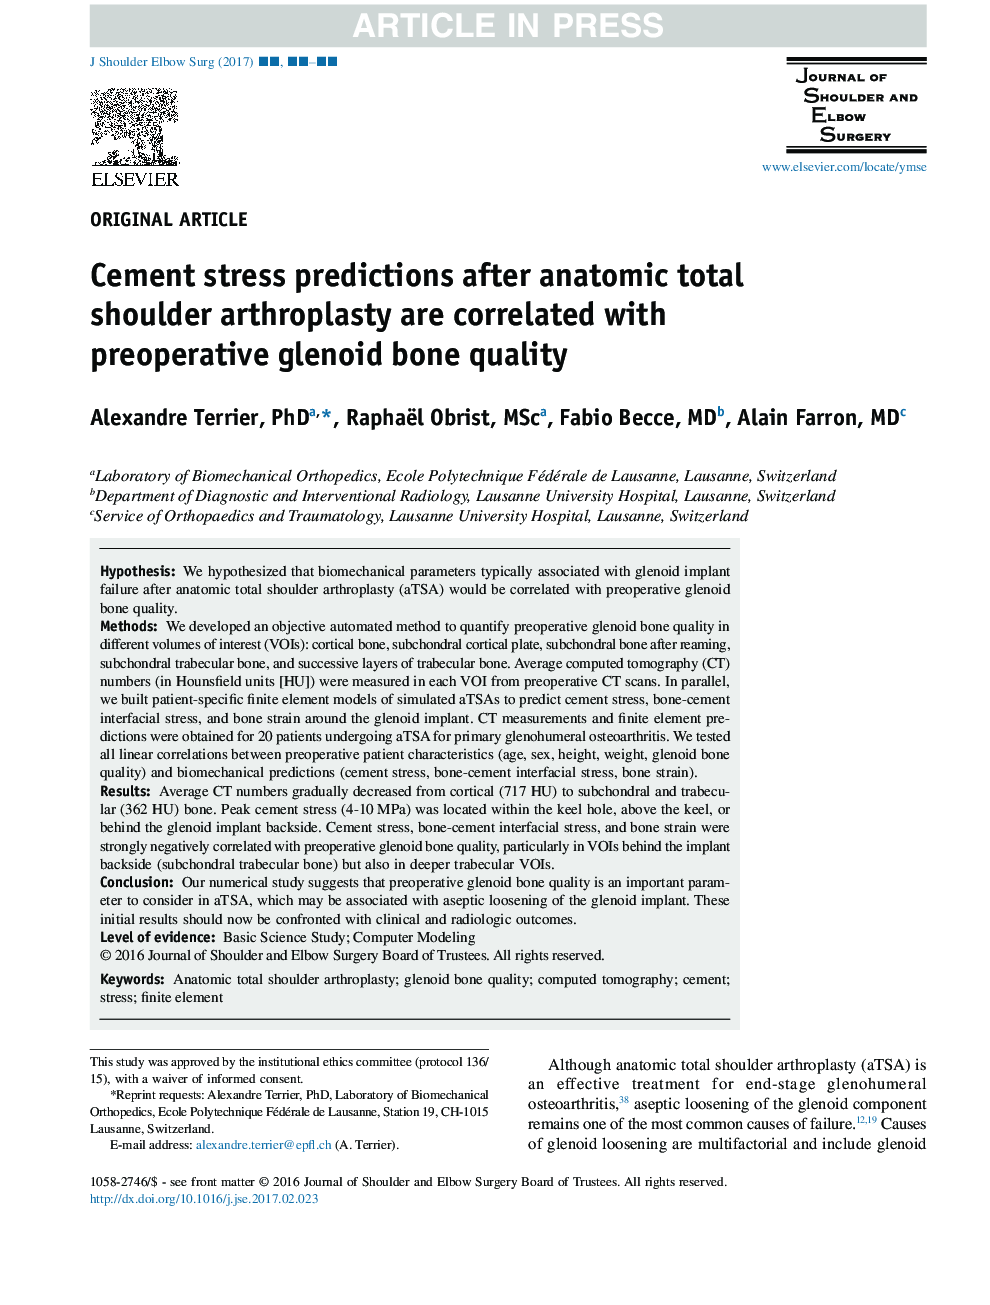 Cement stress predictions after anatomic total shoulder arthroplasty are correlated with preoperative glenoid bone quality